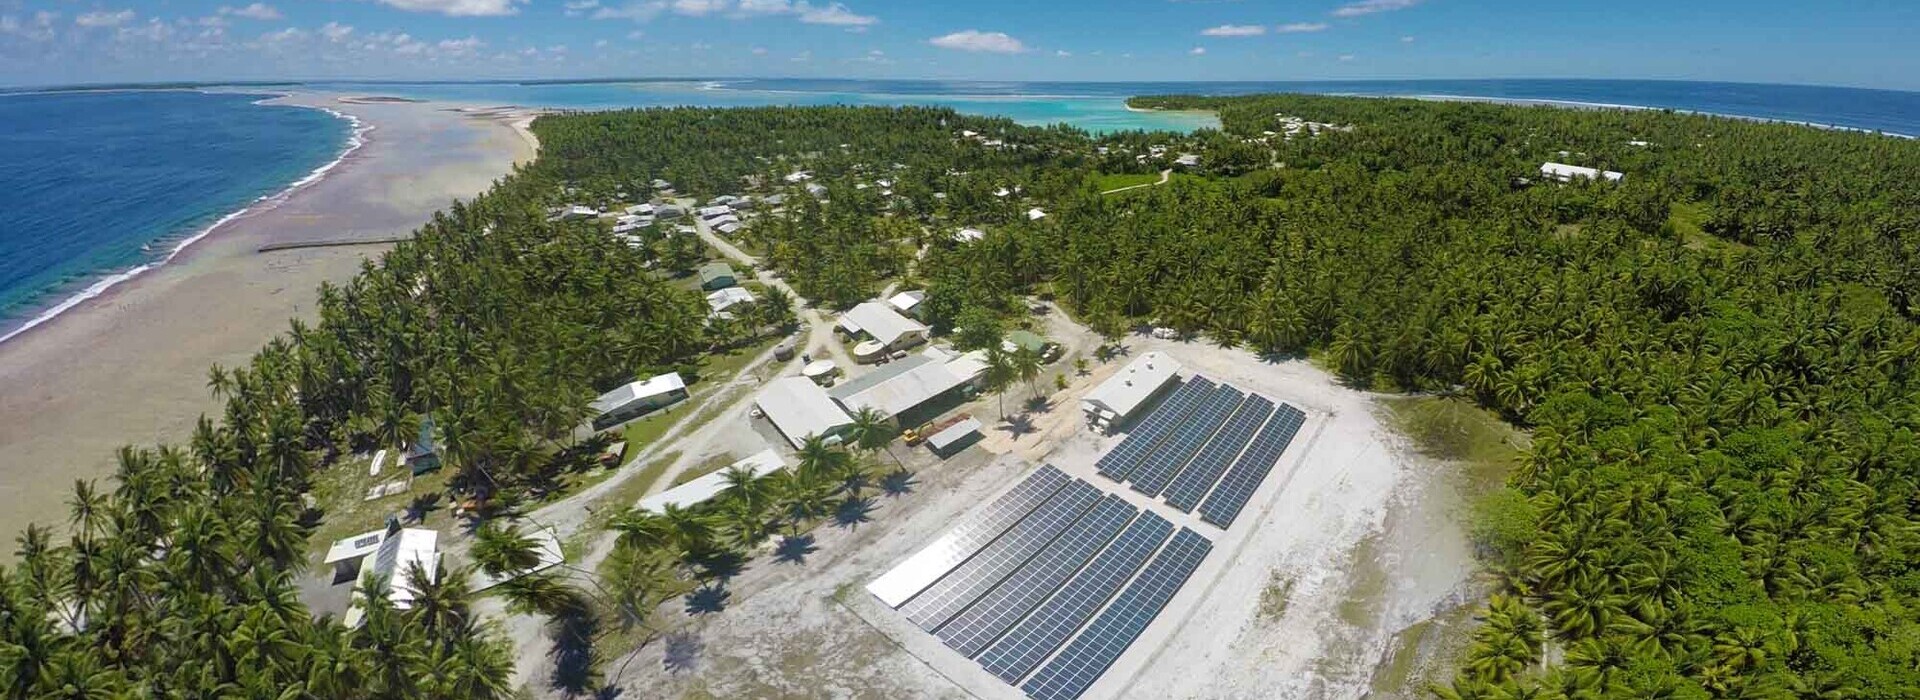 Cook Islands Solar Power Project